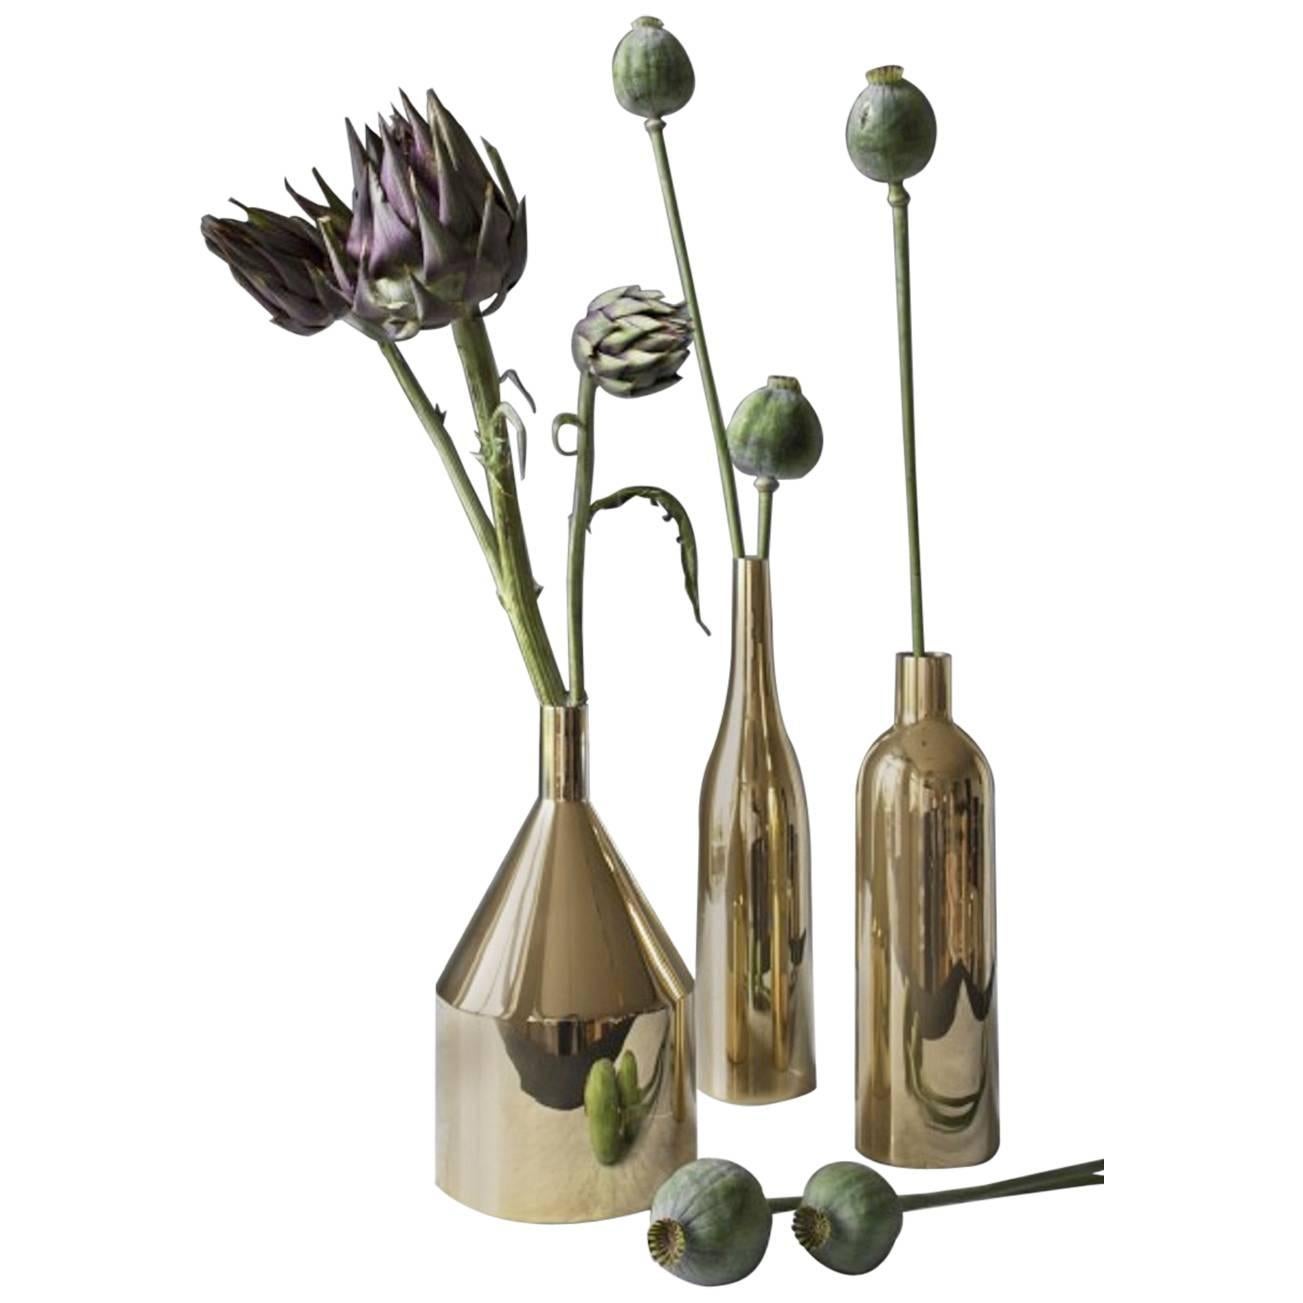 Via Fondazza, Three Large Brass Vases, Design by Paolo Dell'Elce